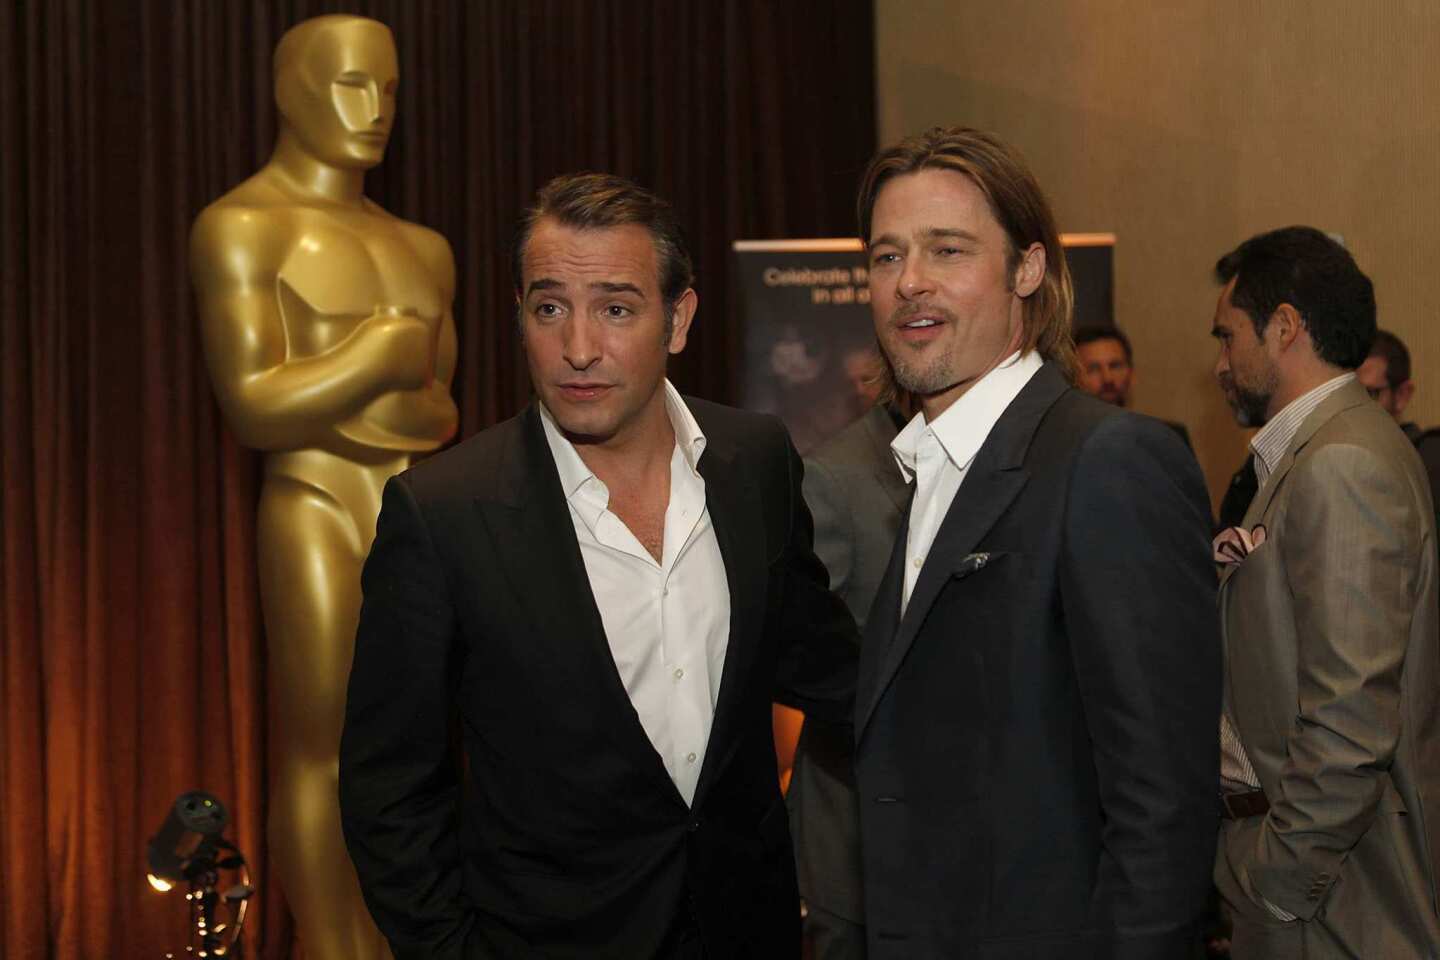 Academy Award contenders Jean Dujardin ("The Artist") and Brad Pitt ("Moneyball," "The Tree of Life") chat at the luncheon.